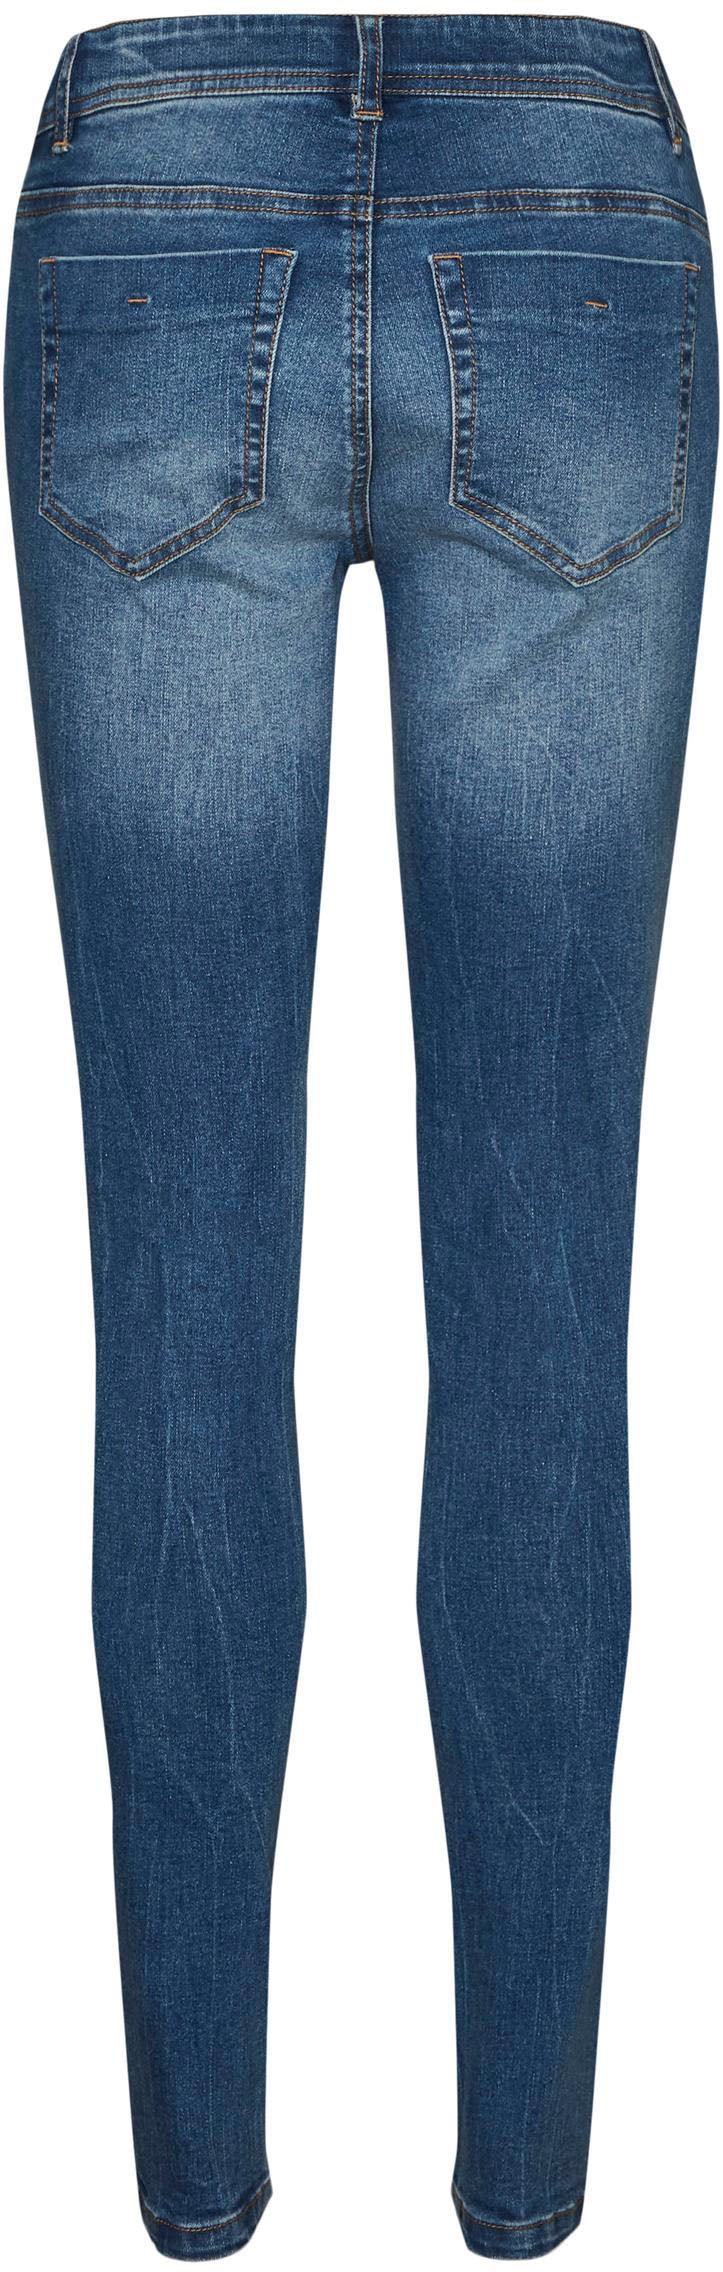 JEANS SLIM Mamalicious Slim-fit-Jeans bei OTTOversand ELASTIC« »MLEVANS W.